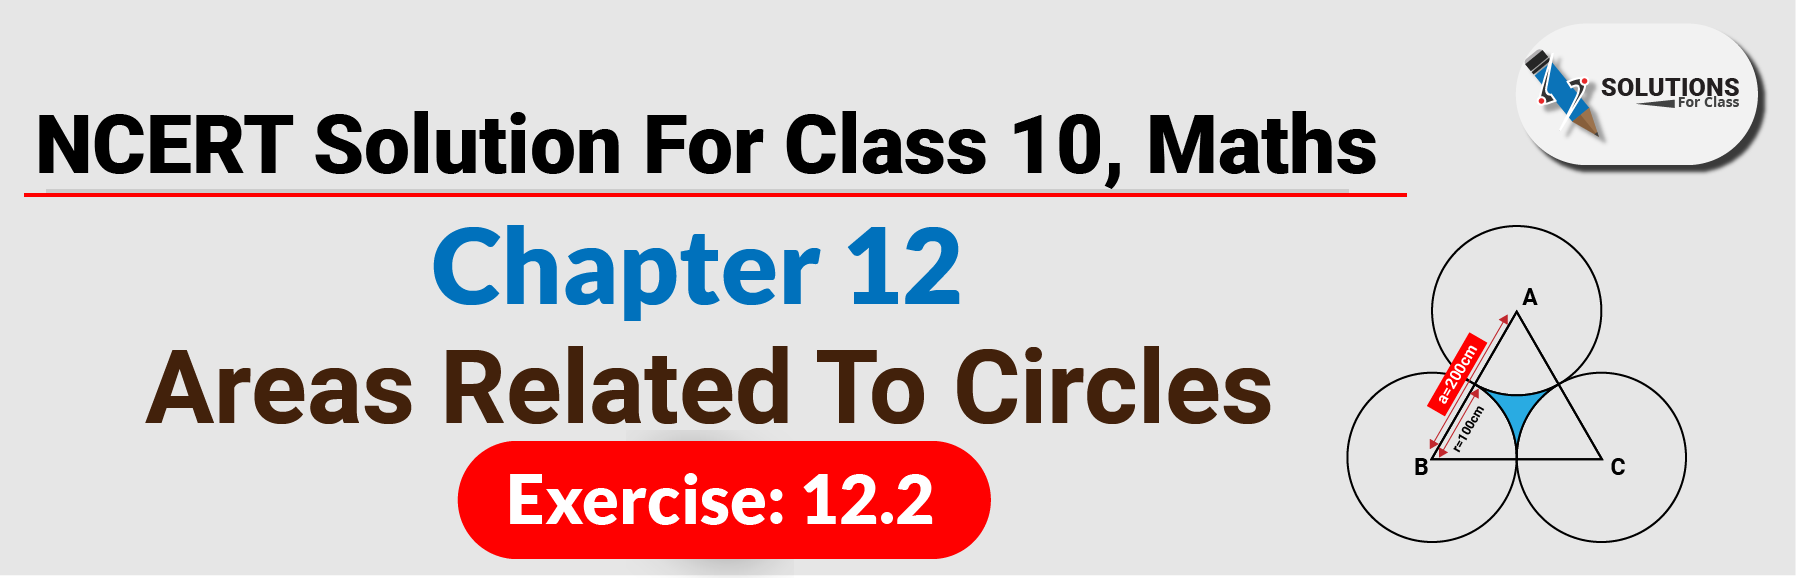 NCERT Solution For Class 10, Maths, Chapter 12, Areas Related To Circles, Ex. 12.2